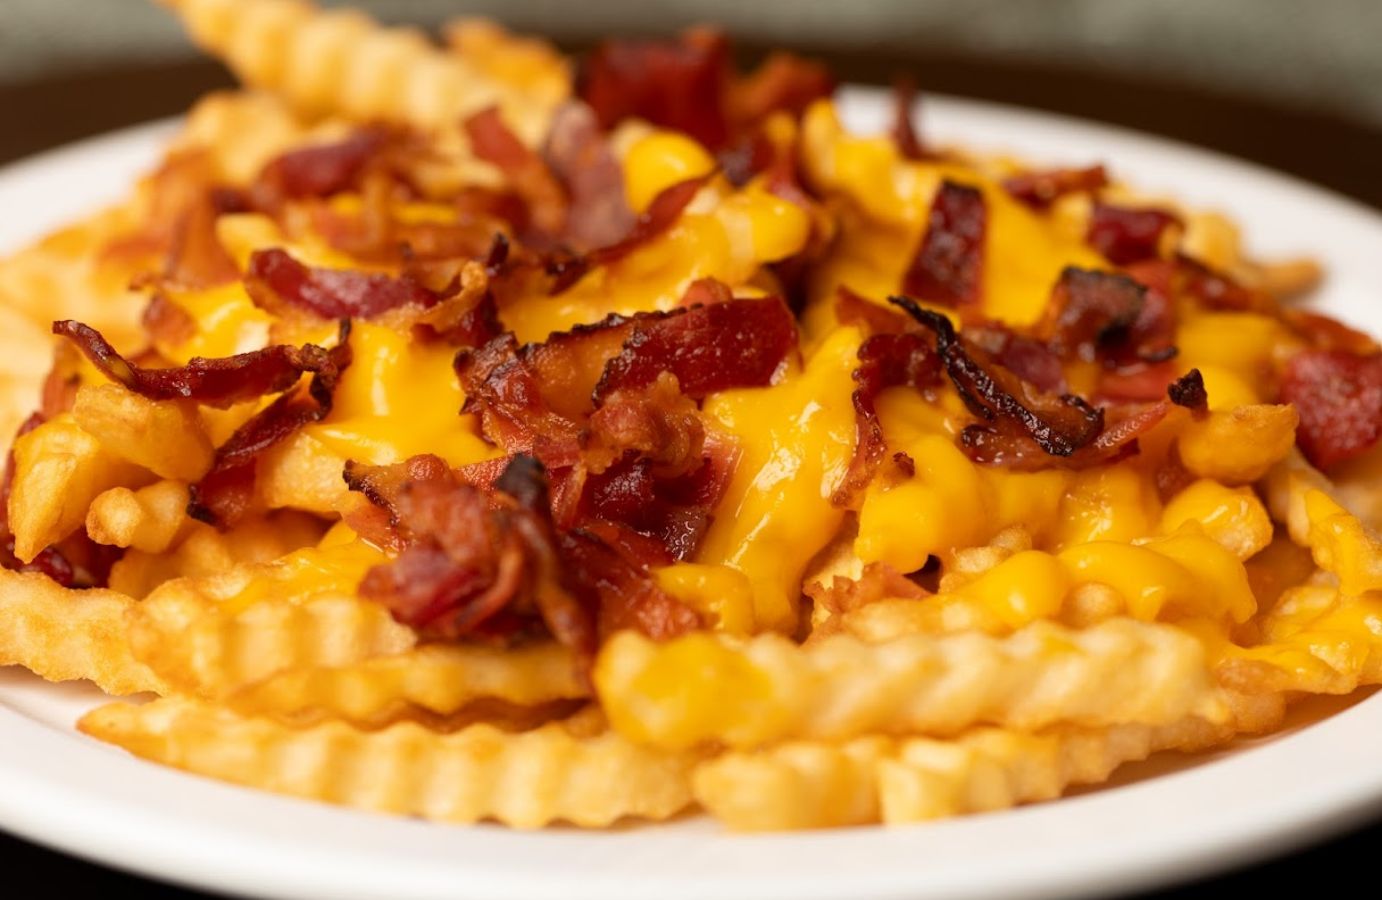 Closeup of a plate with bacon and cheese fries